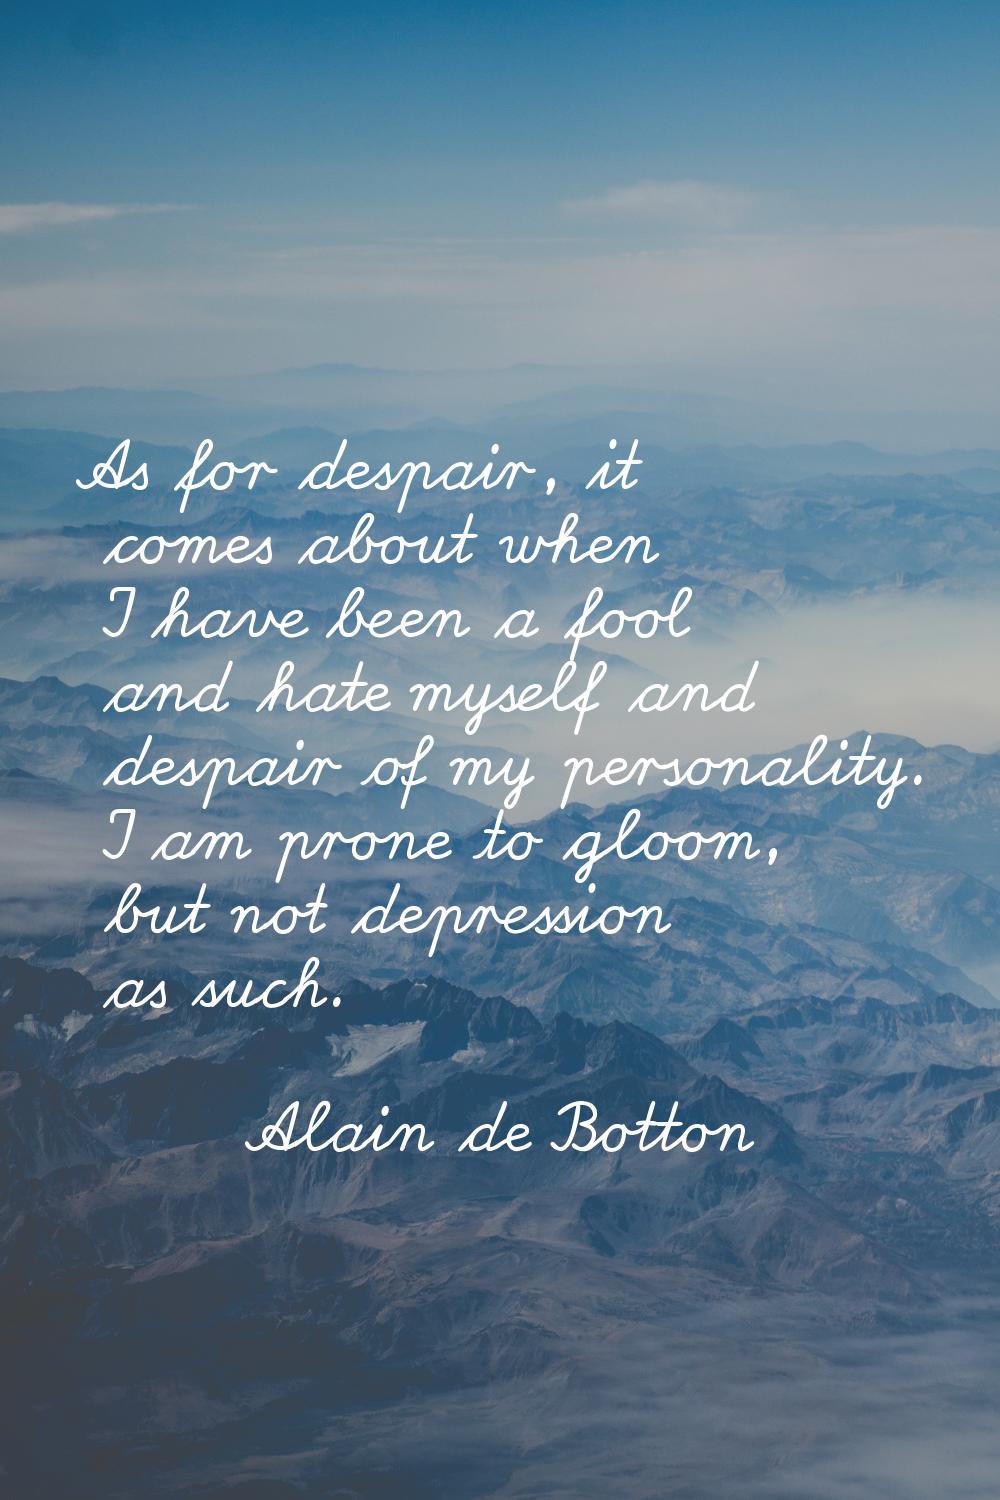 As for despair, it comes about when I have been a fool and hate myself and despair of my personalit